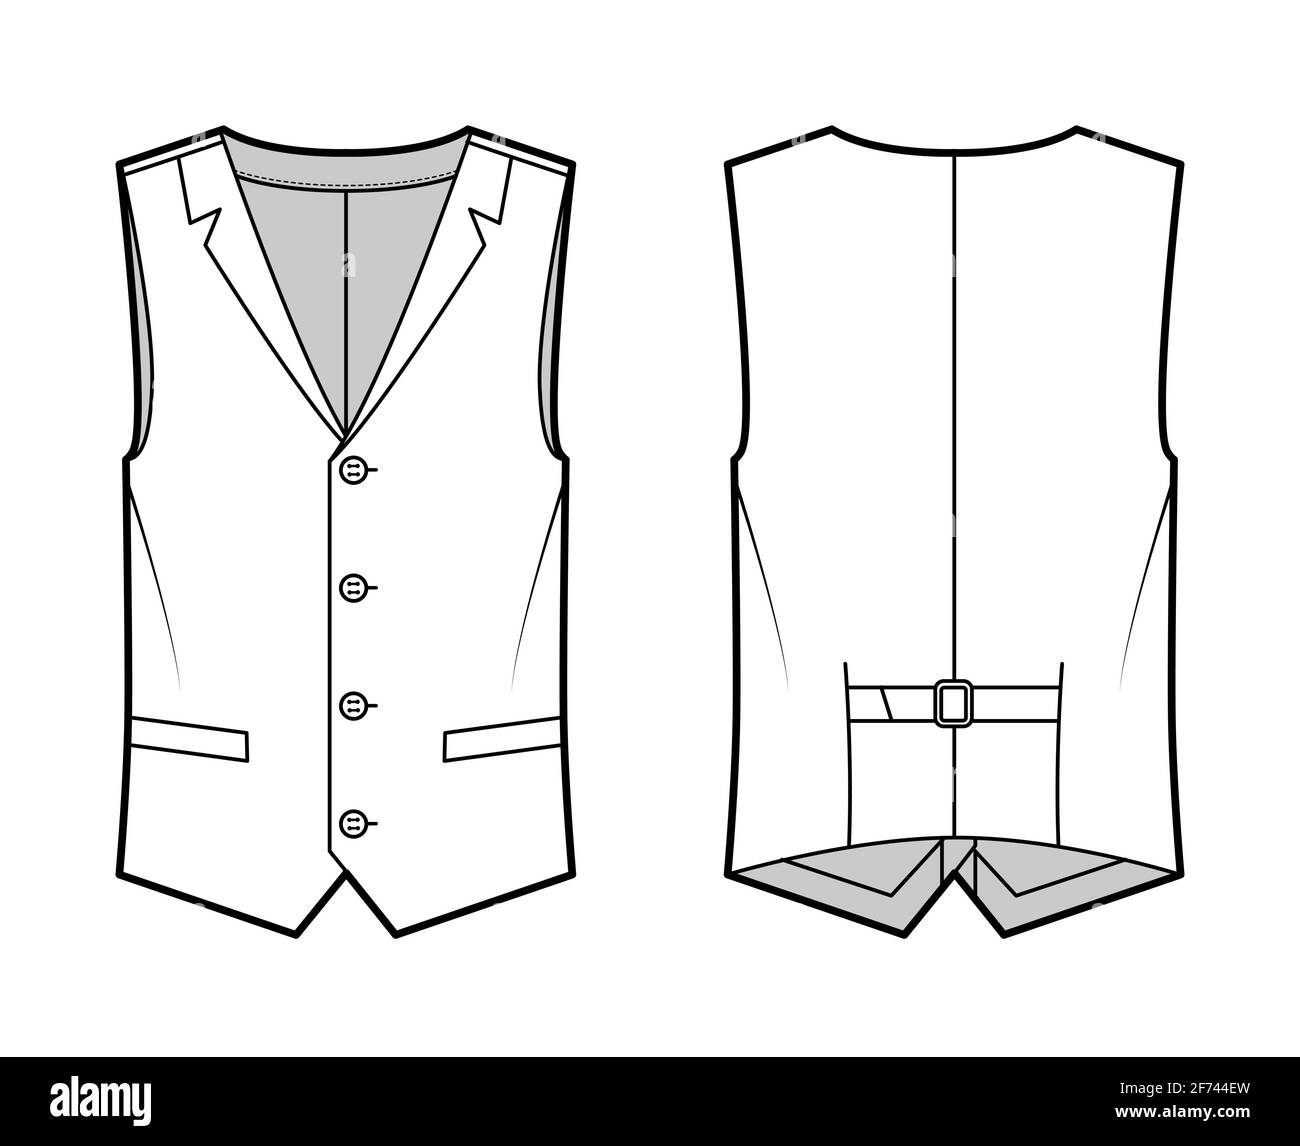 Lapelled Vest Waistcoat Technical Fashion Illustration with Sleeveless,  Notched Shawl Collar, Button-up Closure, Pockets Stock Vector -  Illustration of design, hipster: 215982026